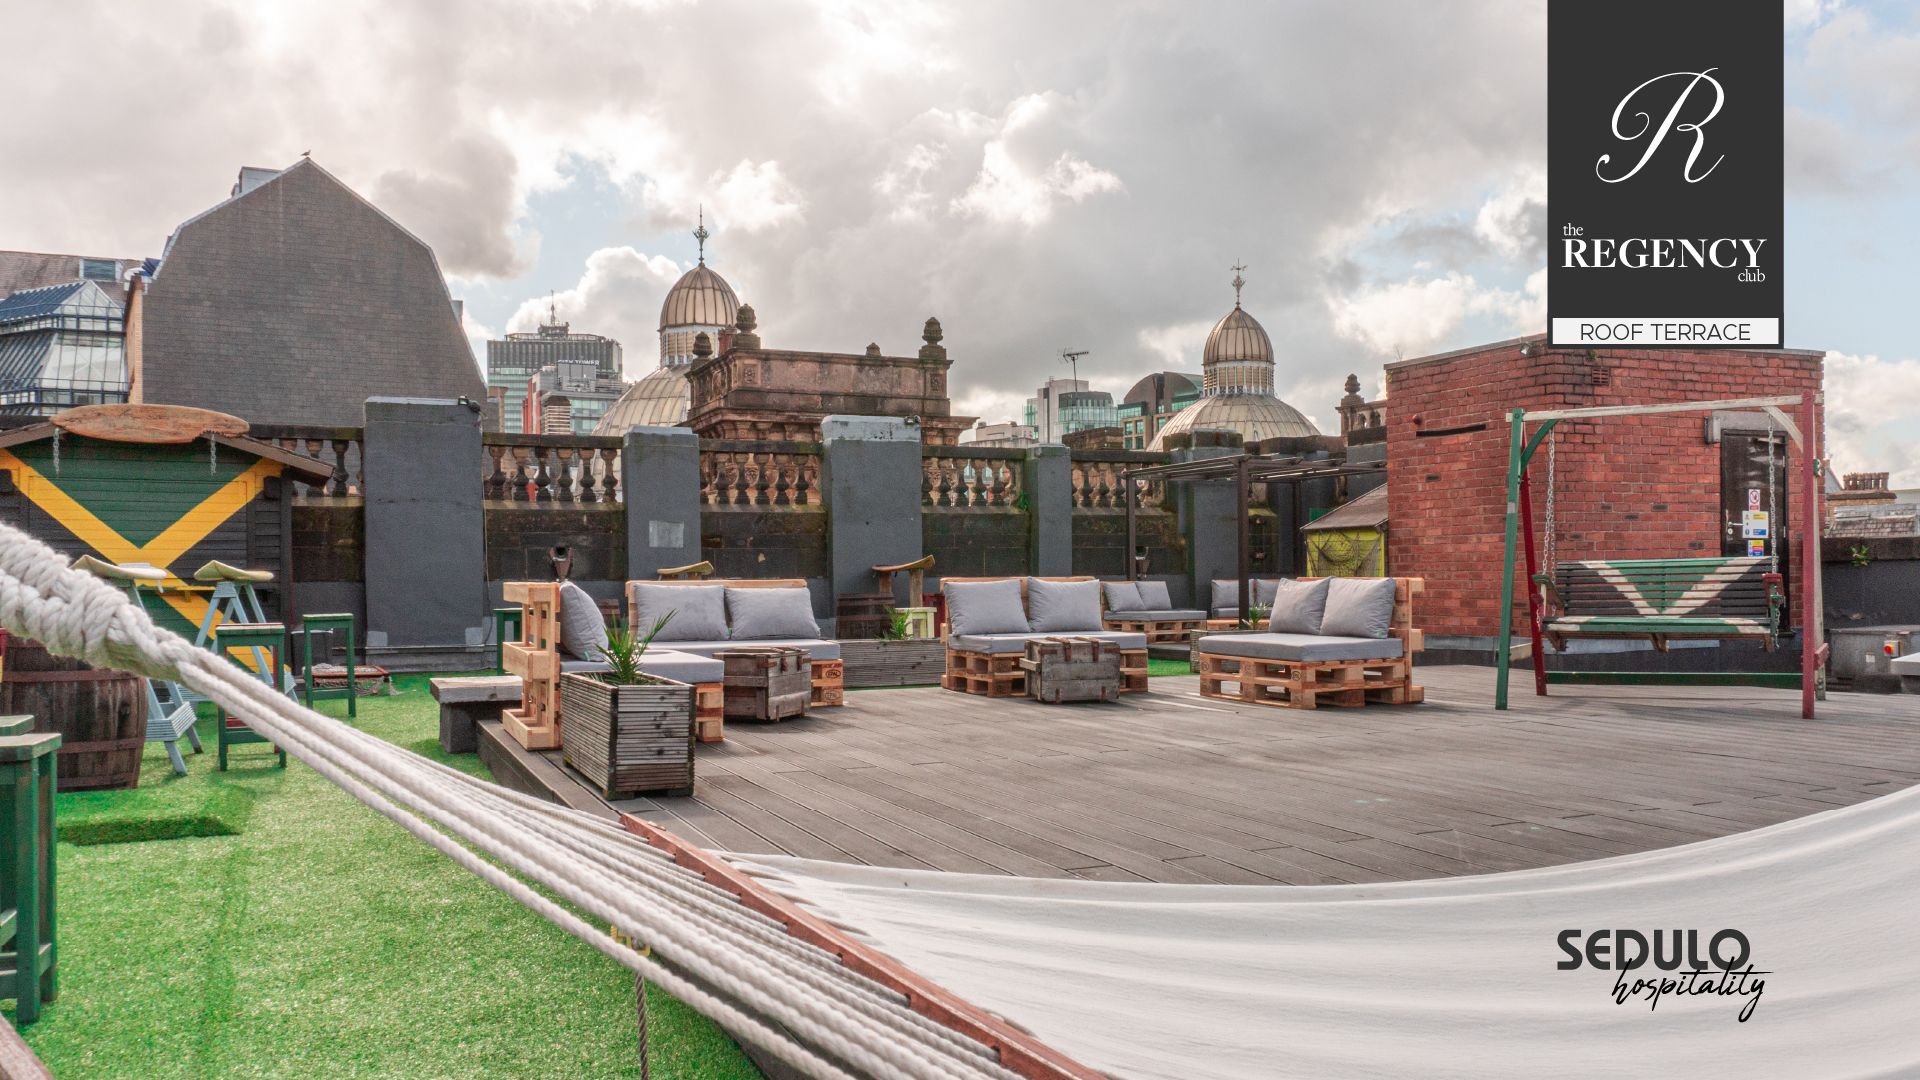 Photo of the Regency Club - Rooftop Bar at Sedulo Headquarters in Deansgate